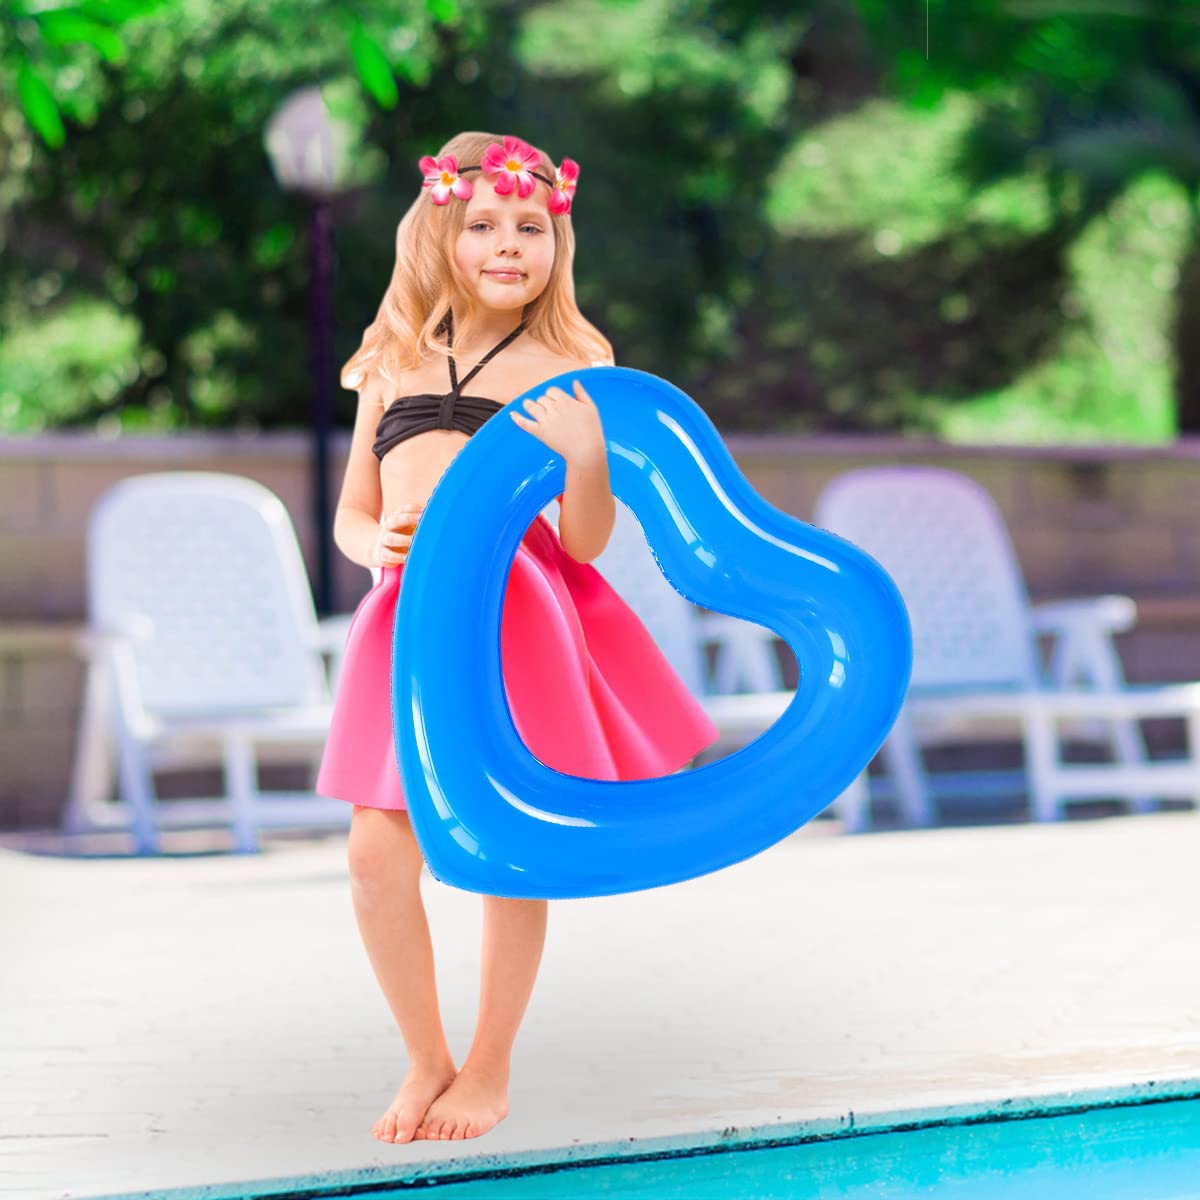 SUNSHINE-MALL Inflatable Swim Rings, Heart Shaped Swimming Pool Float Loungers Tube, Water Fun Beach Party Toys for Kids, Adults Blue